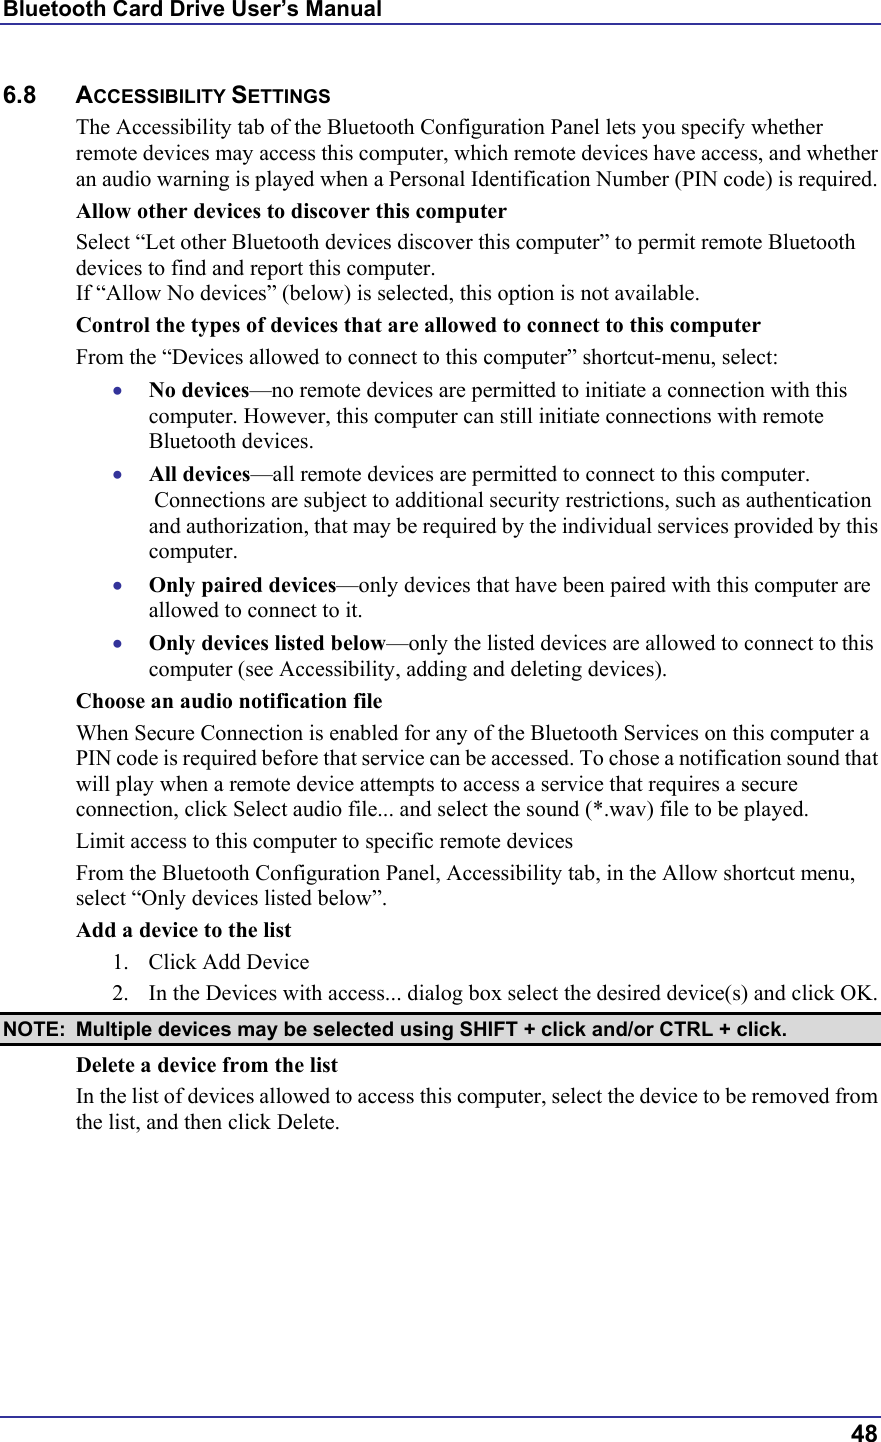 Bluetooth Card Drive User’s Manual  48 6.8 ACCESSIBILITY SETTINGS The Accessibility tab of the Bluetooth Configuration Panel lets you specify whether remote devices may access this computer, which remote devices have access, and whether an audio warning is played when a Personal Identification Number (PIN code) is required. Allow other devices to discover this computer Select “Let other Bluetooth devices discover this computer” to permit remote Bluetooth devices to find and report this computer. If “Allow No devices” (below) is selected, this option is not available. Control the types of devices that are allowed to connect to this computer From the “Devices allowed to connect to this computer” shortcut-menu, select: •  No devices—no remote devices are permitted to initiate a connection with this computer. However, this computer can still initiate connections with remote Bluetooth devices. •  All devices—all remote devices are permitted to connect to this computer.  Connections are subject to additional security restrictions, such as authentication and authorization, that may be required by the individual services provided by this computer. •  Only paired devices—only devices that have been paired with this computer are allowed to connect to it. •  Only devices listed below—only the listed devices are allowed to connect to this computer (see Accessibility, adding and deleting devices). Choose an audio notification file When Secure Connection is enabled for any of the Bluetooth Services on this computer a PIN code is required before that service can be accessed. To chose a notification sound that will play when a remote device attempts to access a service that requires a secure connection, click Select audio file... and select the sound (*.wav) file to be played. Limit access to this computer to specific remote devices From the Bluetooth Configuration Panel, Accessibility tab, in the Allow shortcut menu, select “Only devices listed below”. Add a device to the list 1.  Click Add Device 2.  In the Devices with access... dialog box select the desired device(s) and click OK.  NOTE:  Multiple devices may be selected using SHIFT + click and/or CTRL + click. Delete a device from the list In the list of devices allowed to access this computer, select the device to be removed from the list, and then click Delete.  